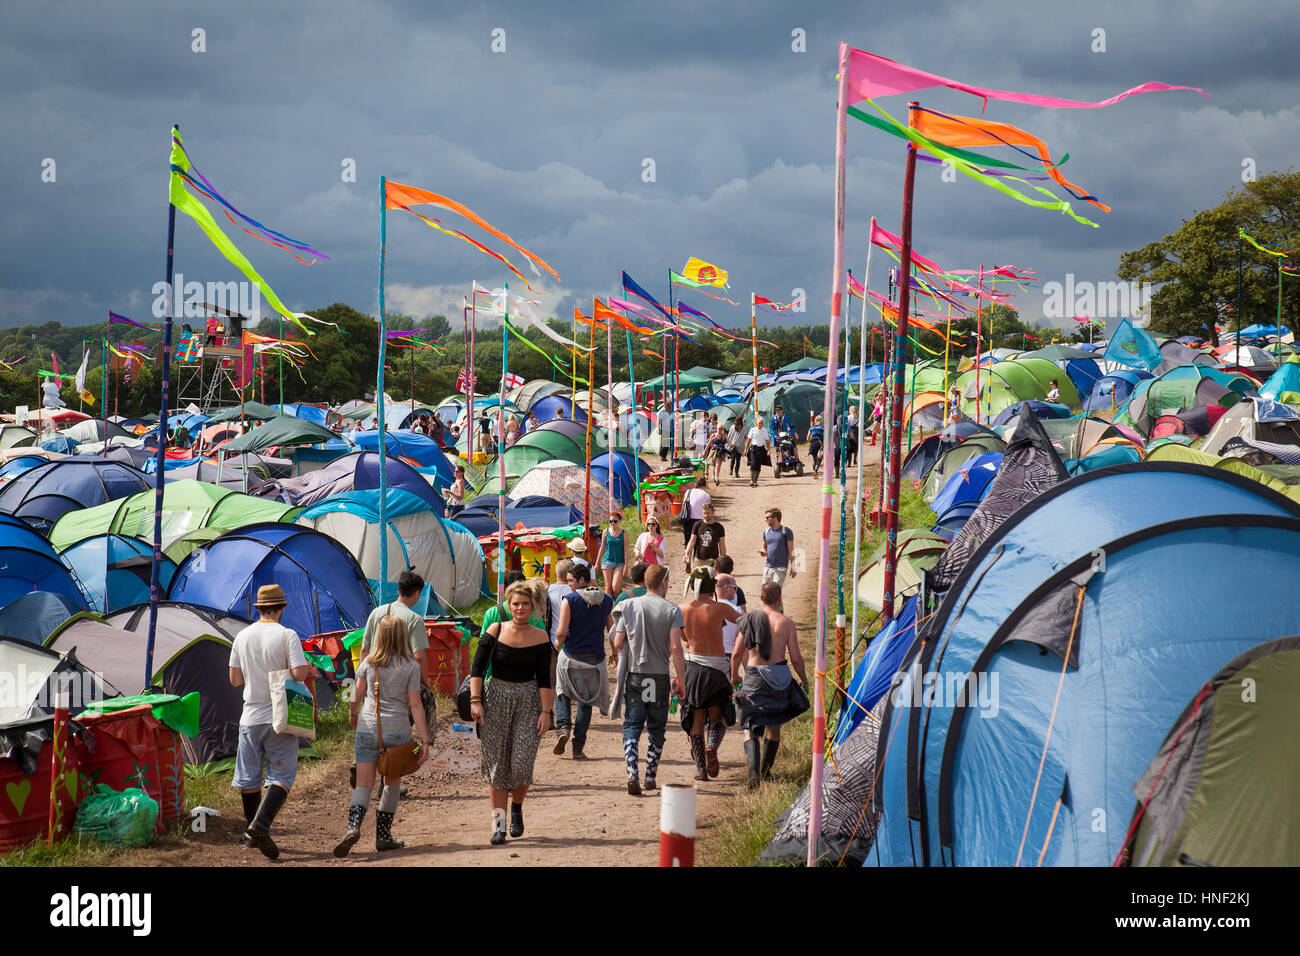 GLASTONBURY, UK - JUNE 27, 2014 : People walking through a  camping area with colouful flags at Glastonbury Festival 2014 Stock Photo